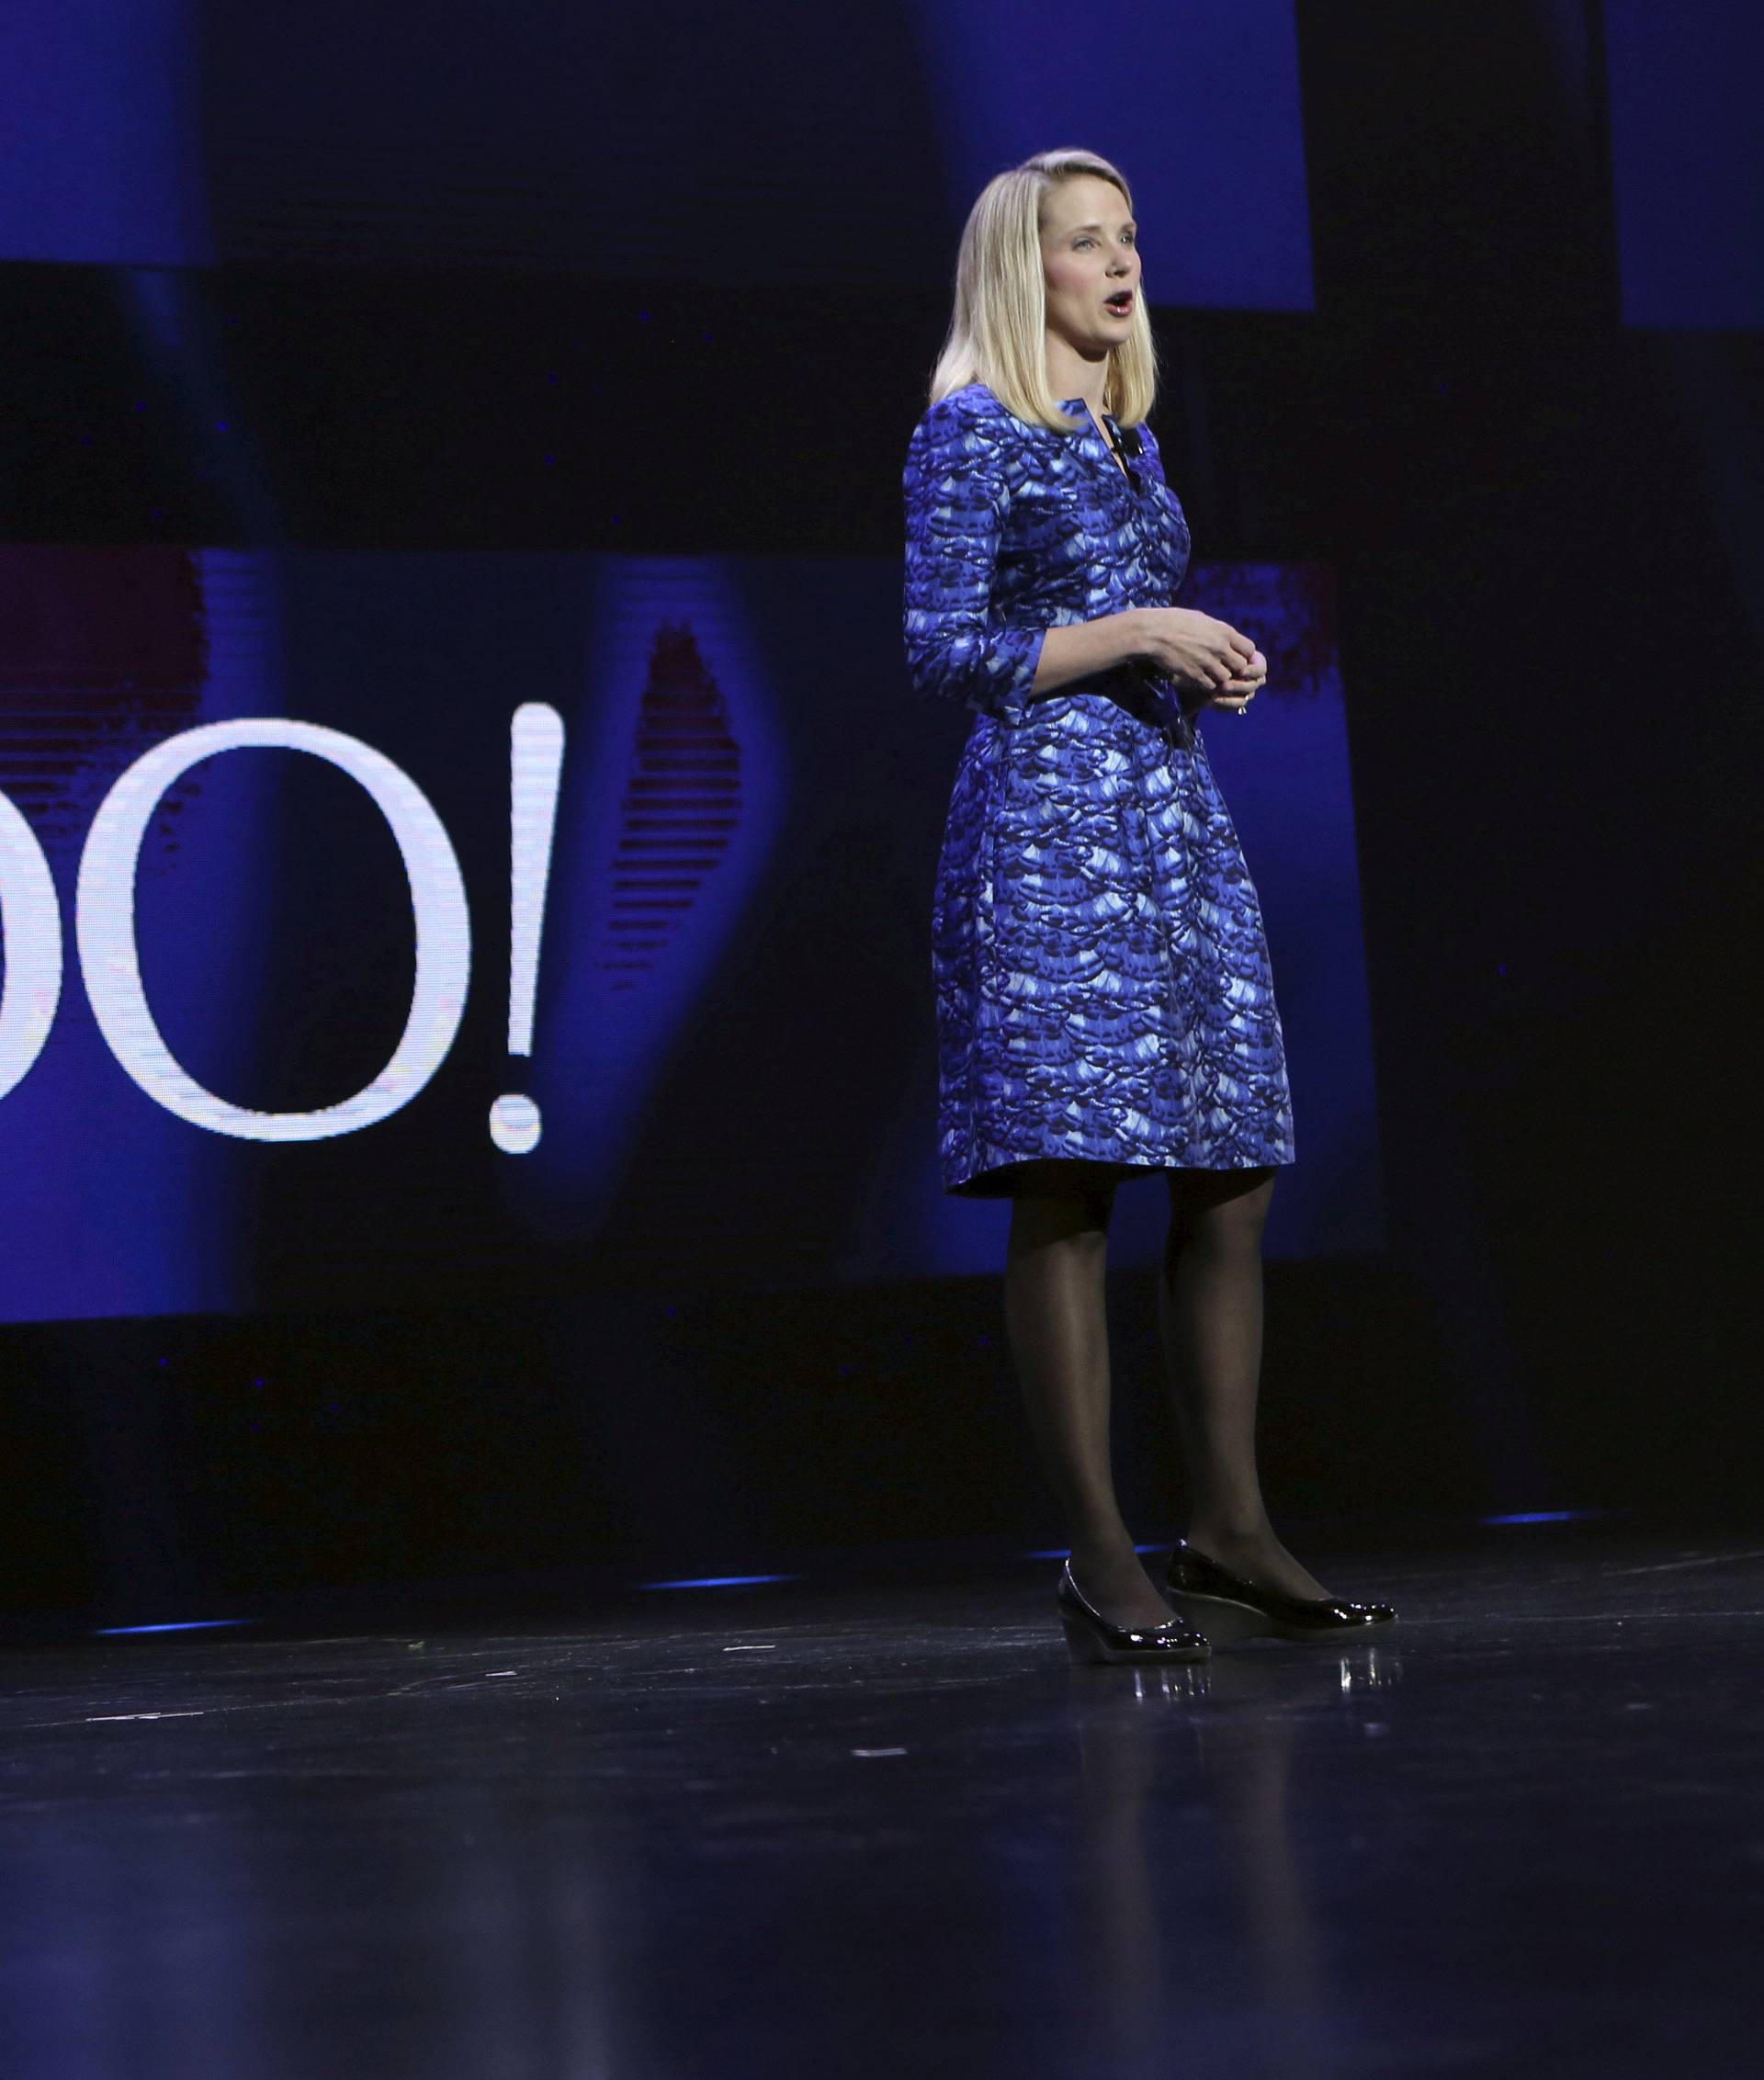 FILE PHOTO -  File photo of Yahoo CEO Marissa Mayer delivering her keynote address at the annual Consumer Electronics Show (CES) in Las Vegas